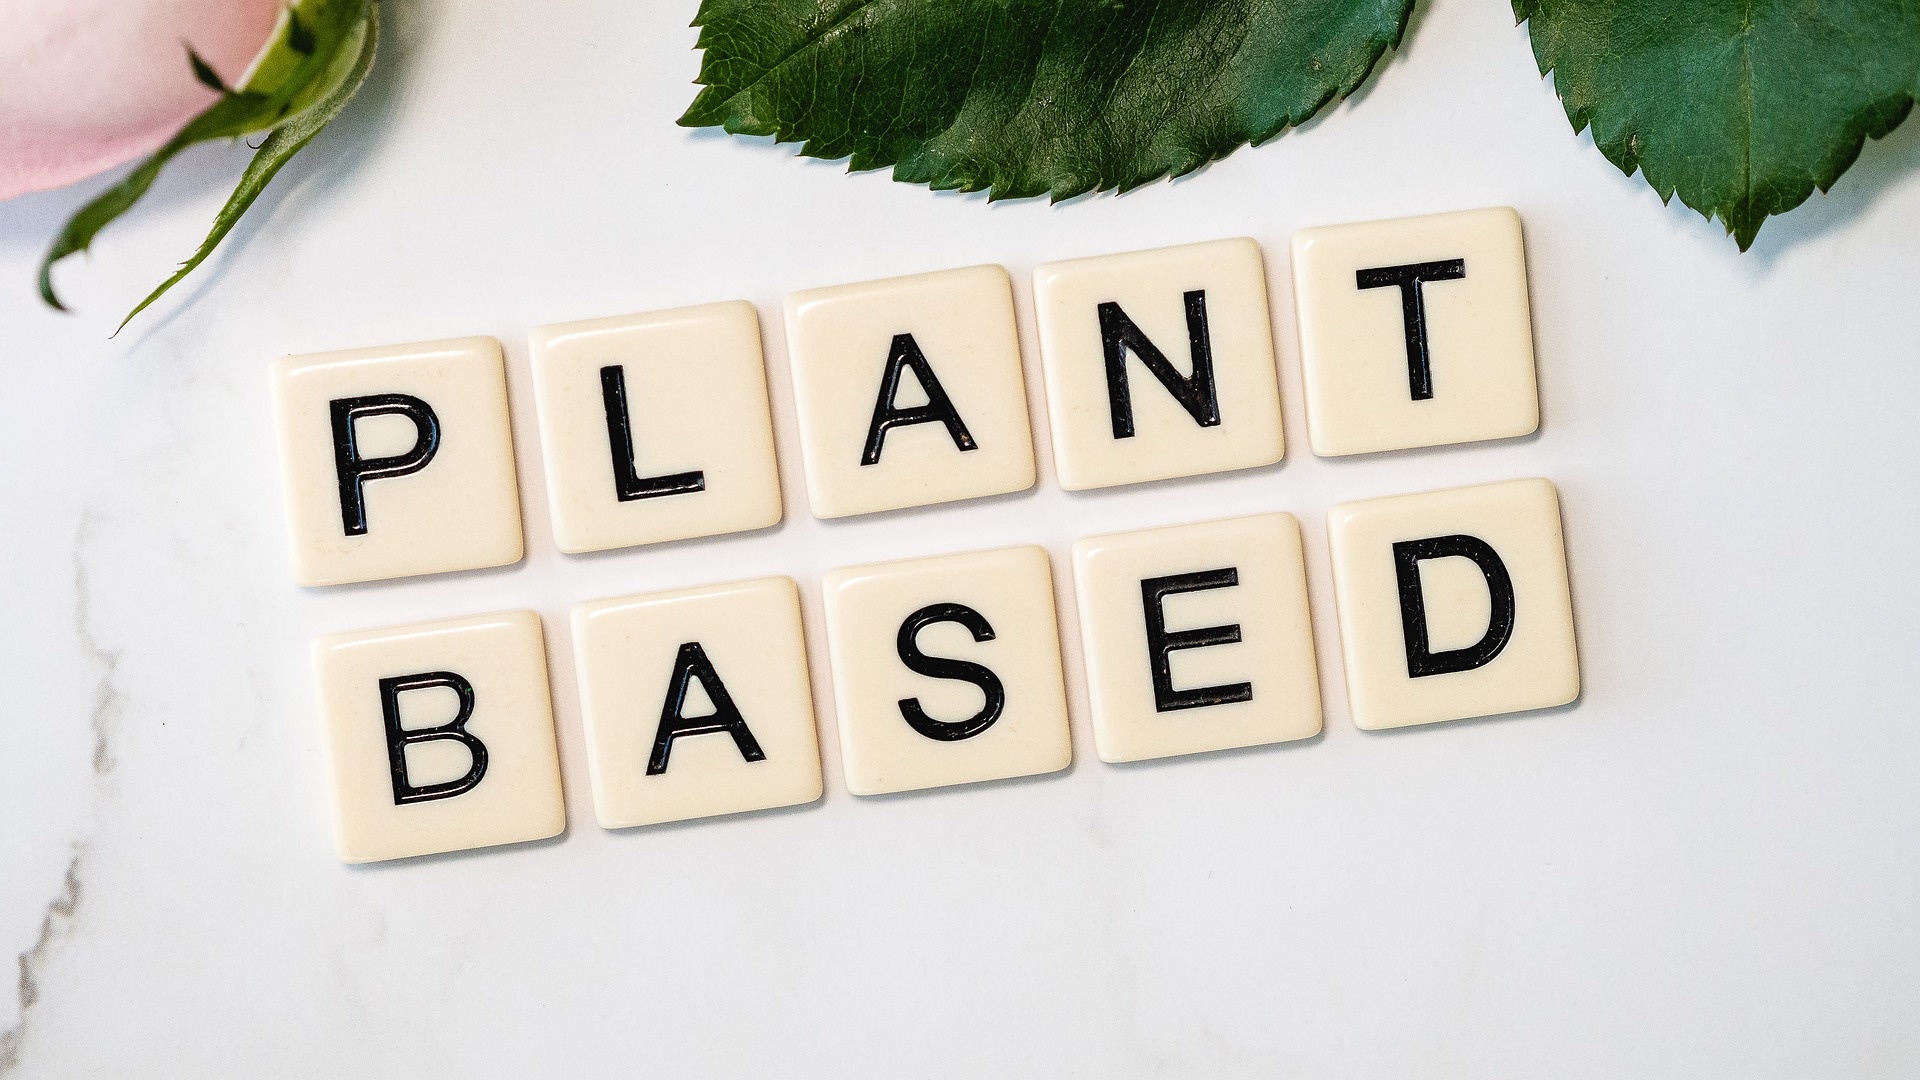 Is going plant-based a healthier option?